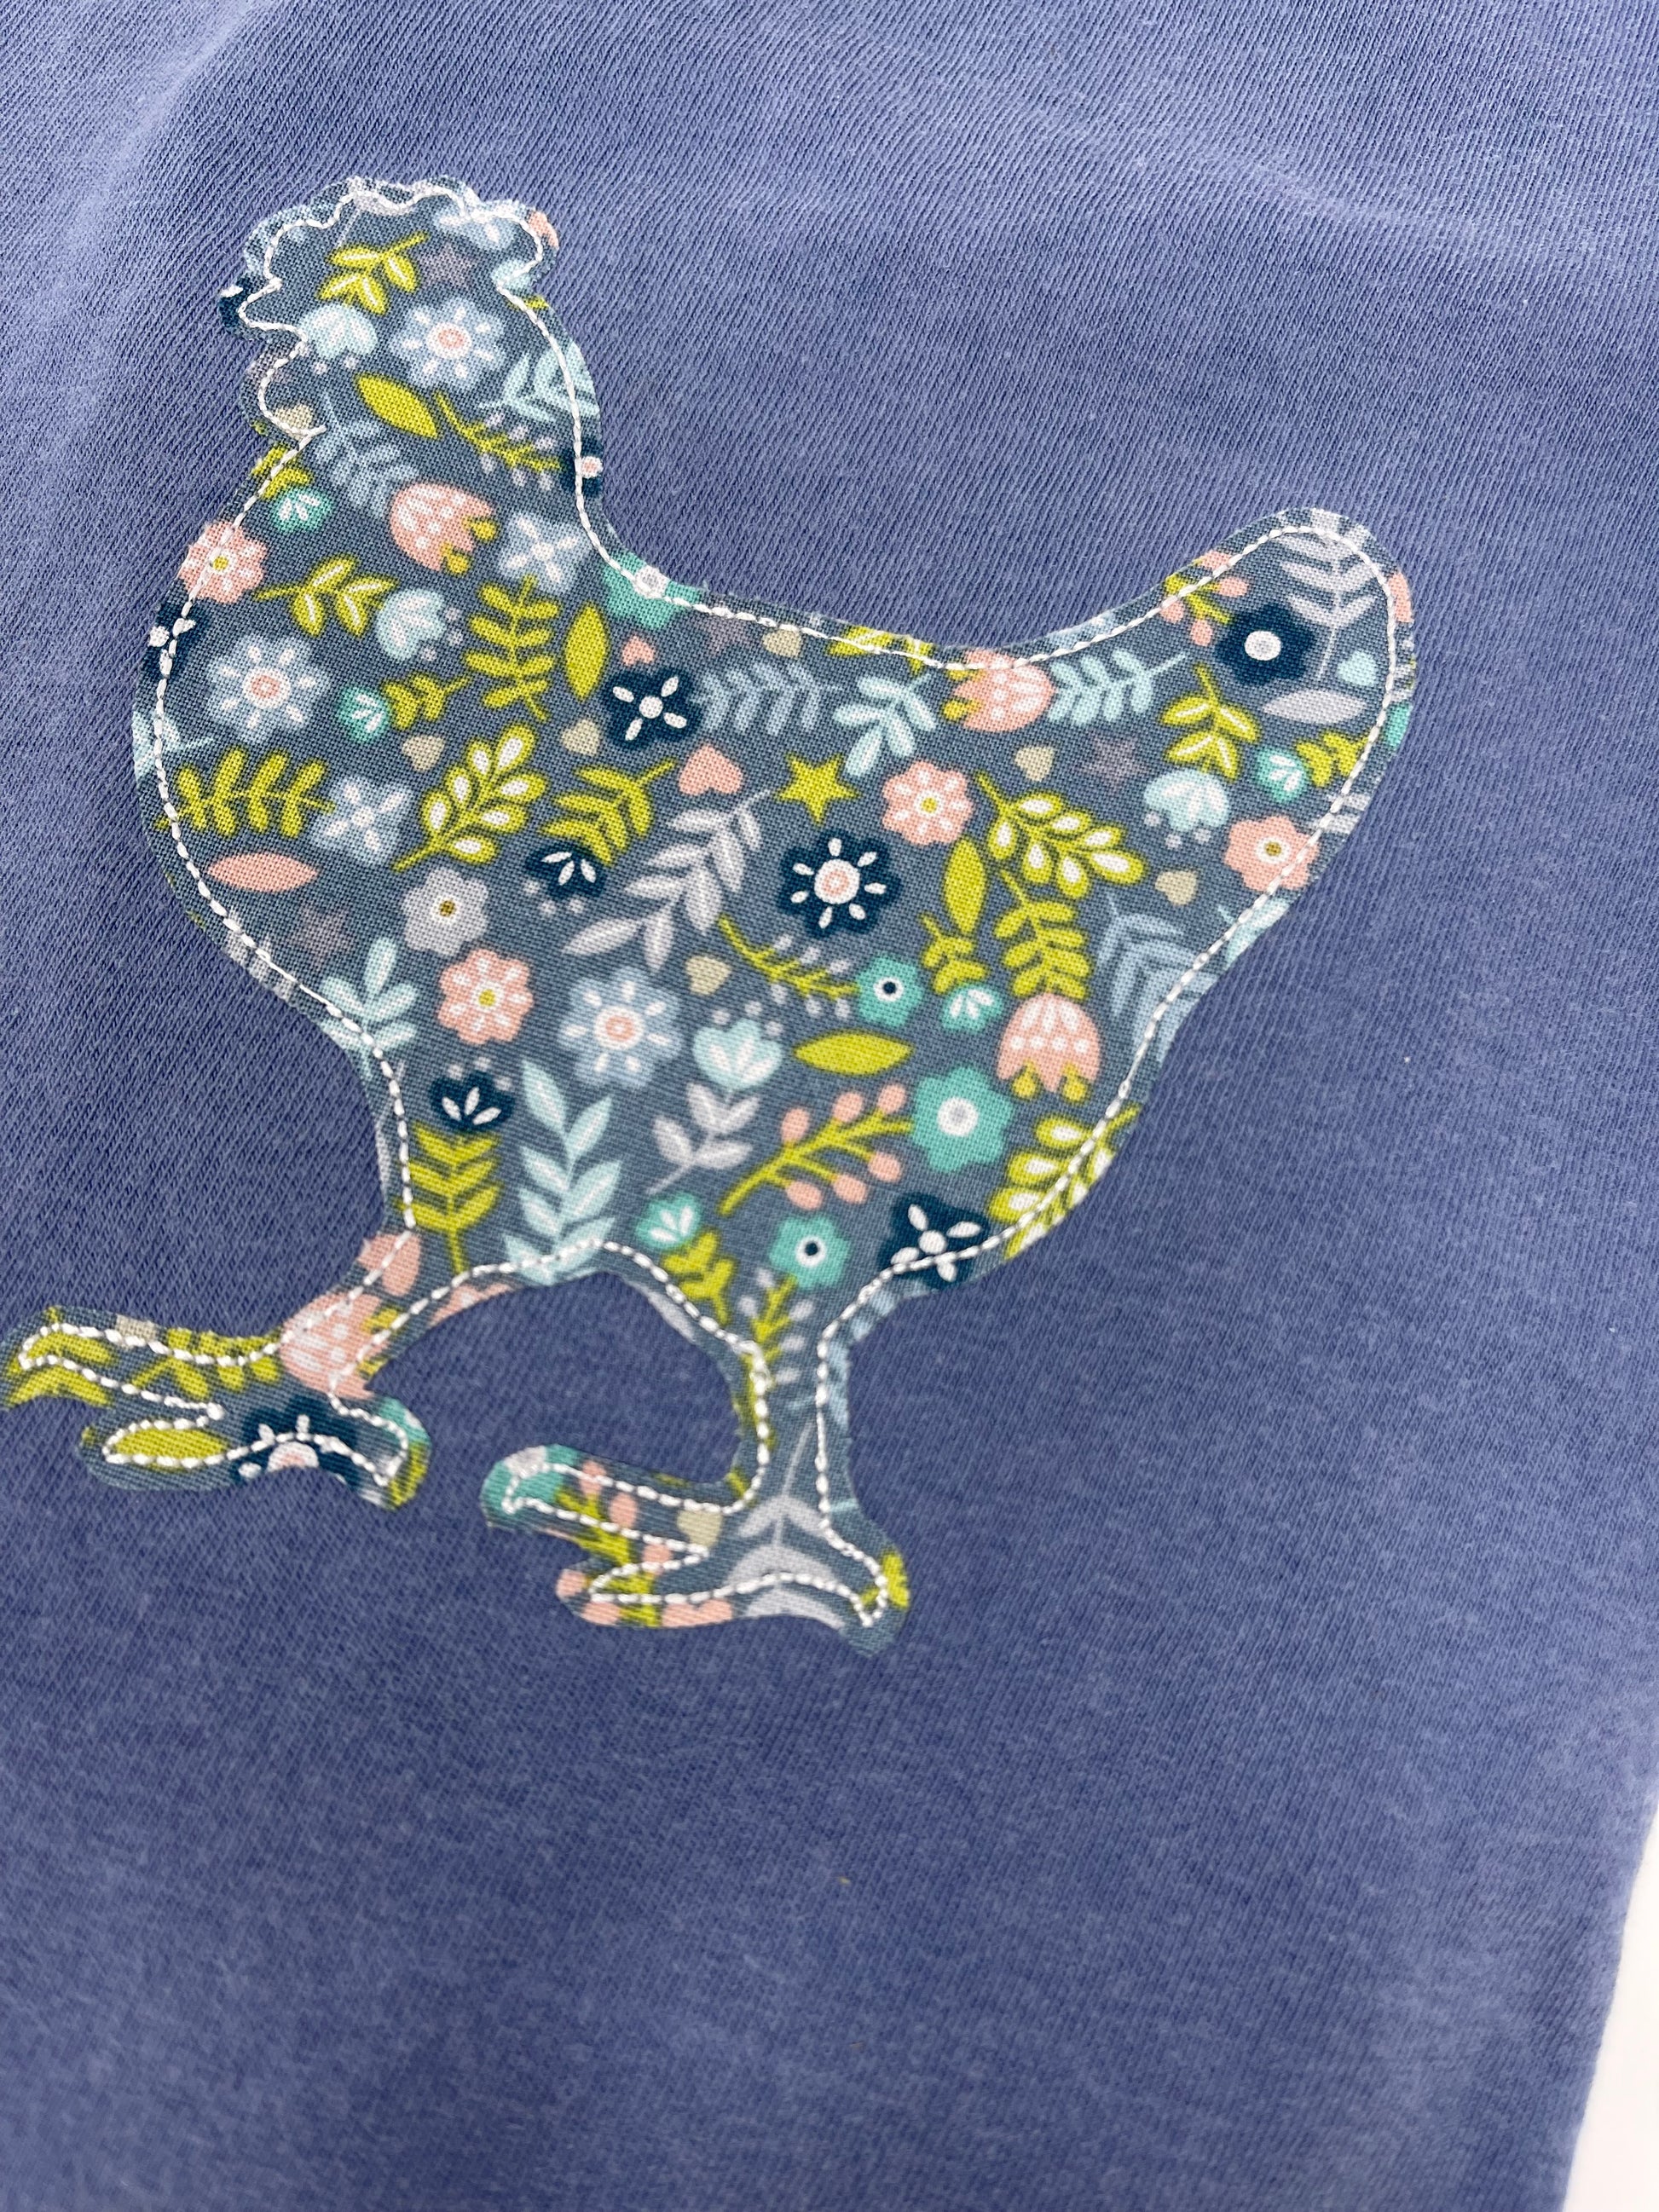 blue t-shirt with chicken applique